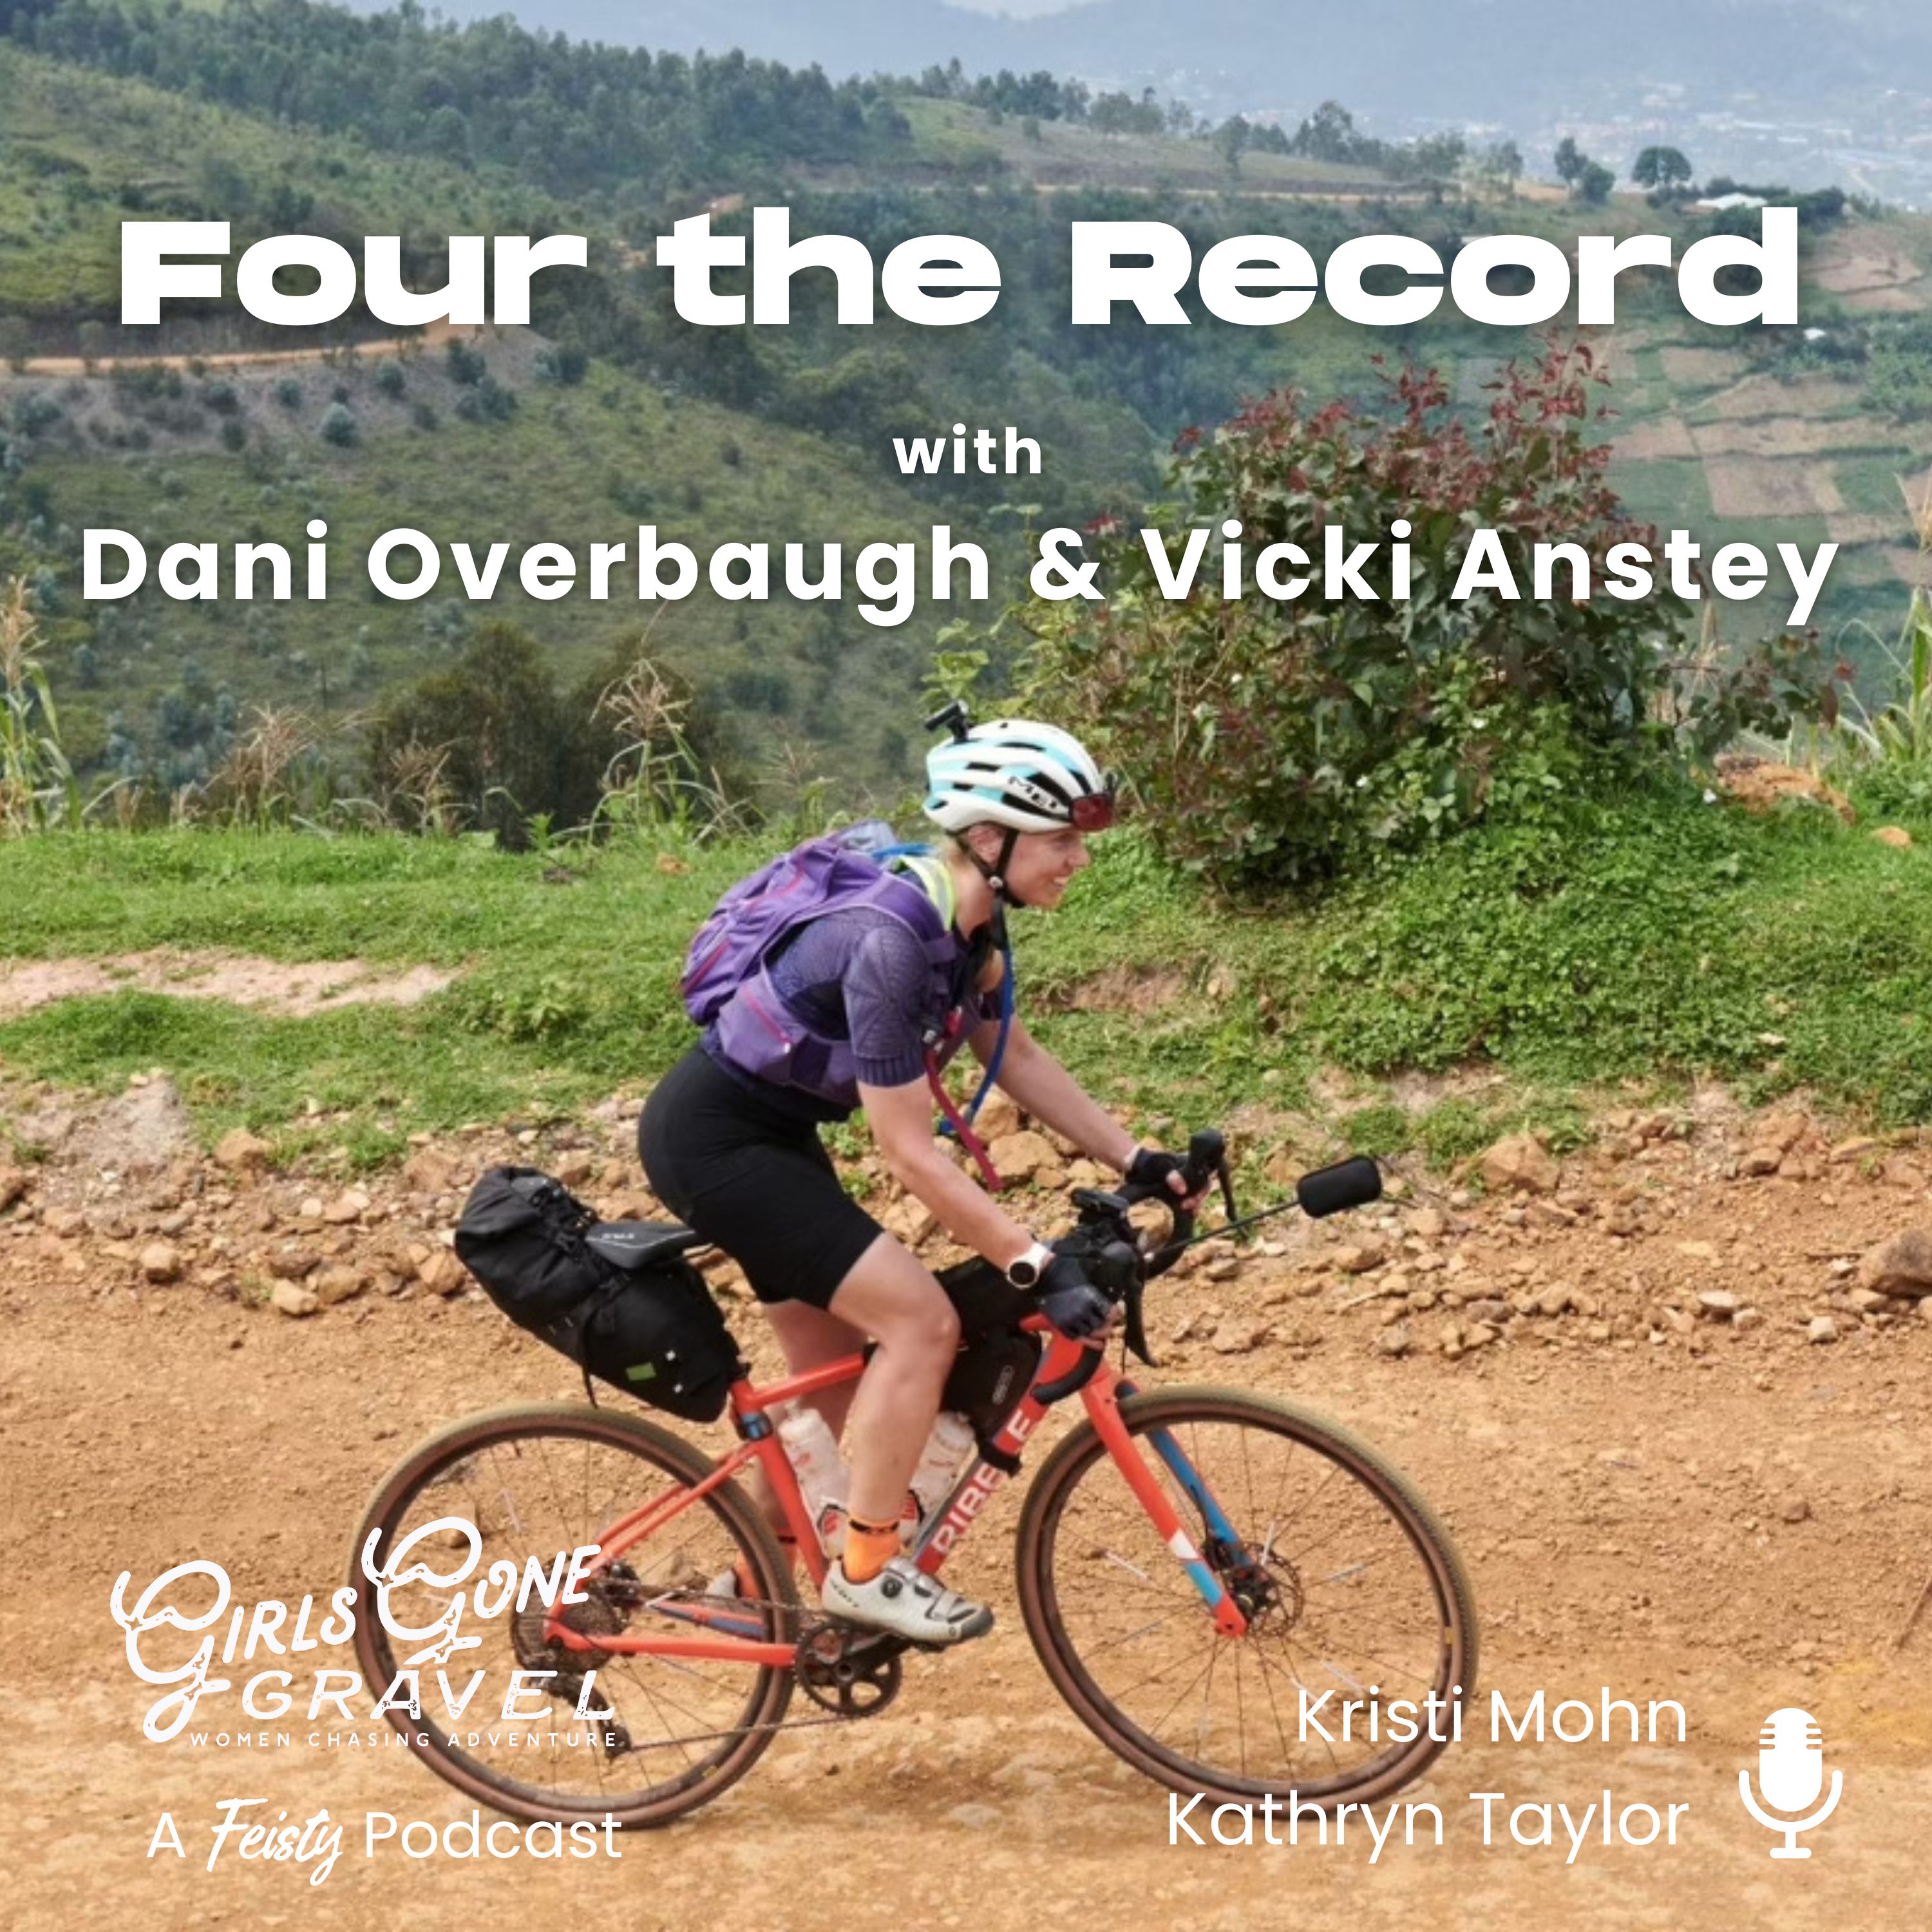 Four the Record with Dani Overbaugh & Vicki Anstey (Episode 172)